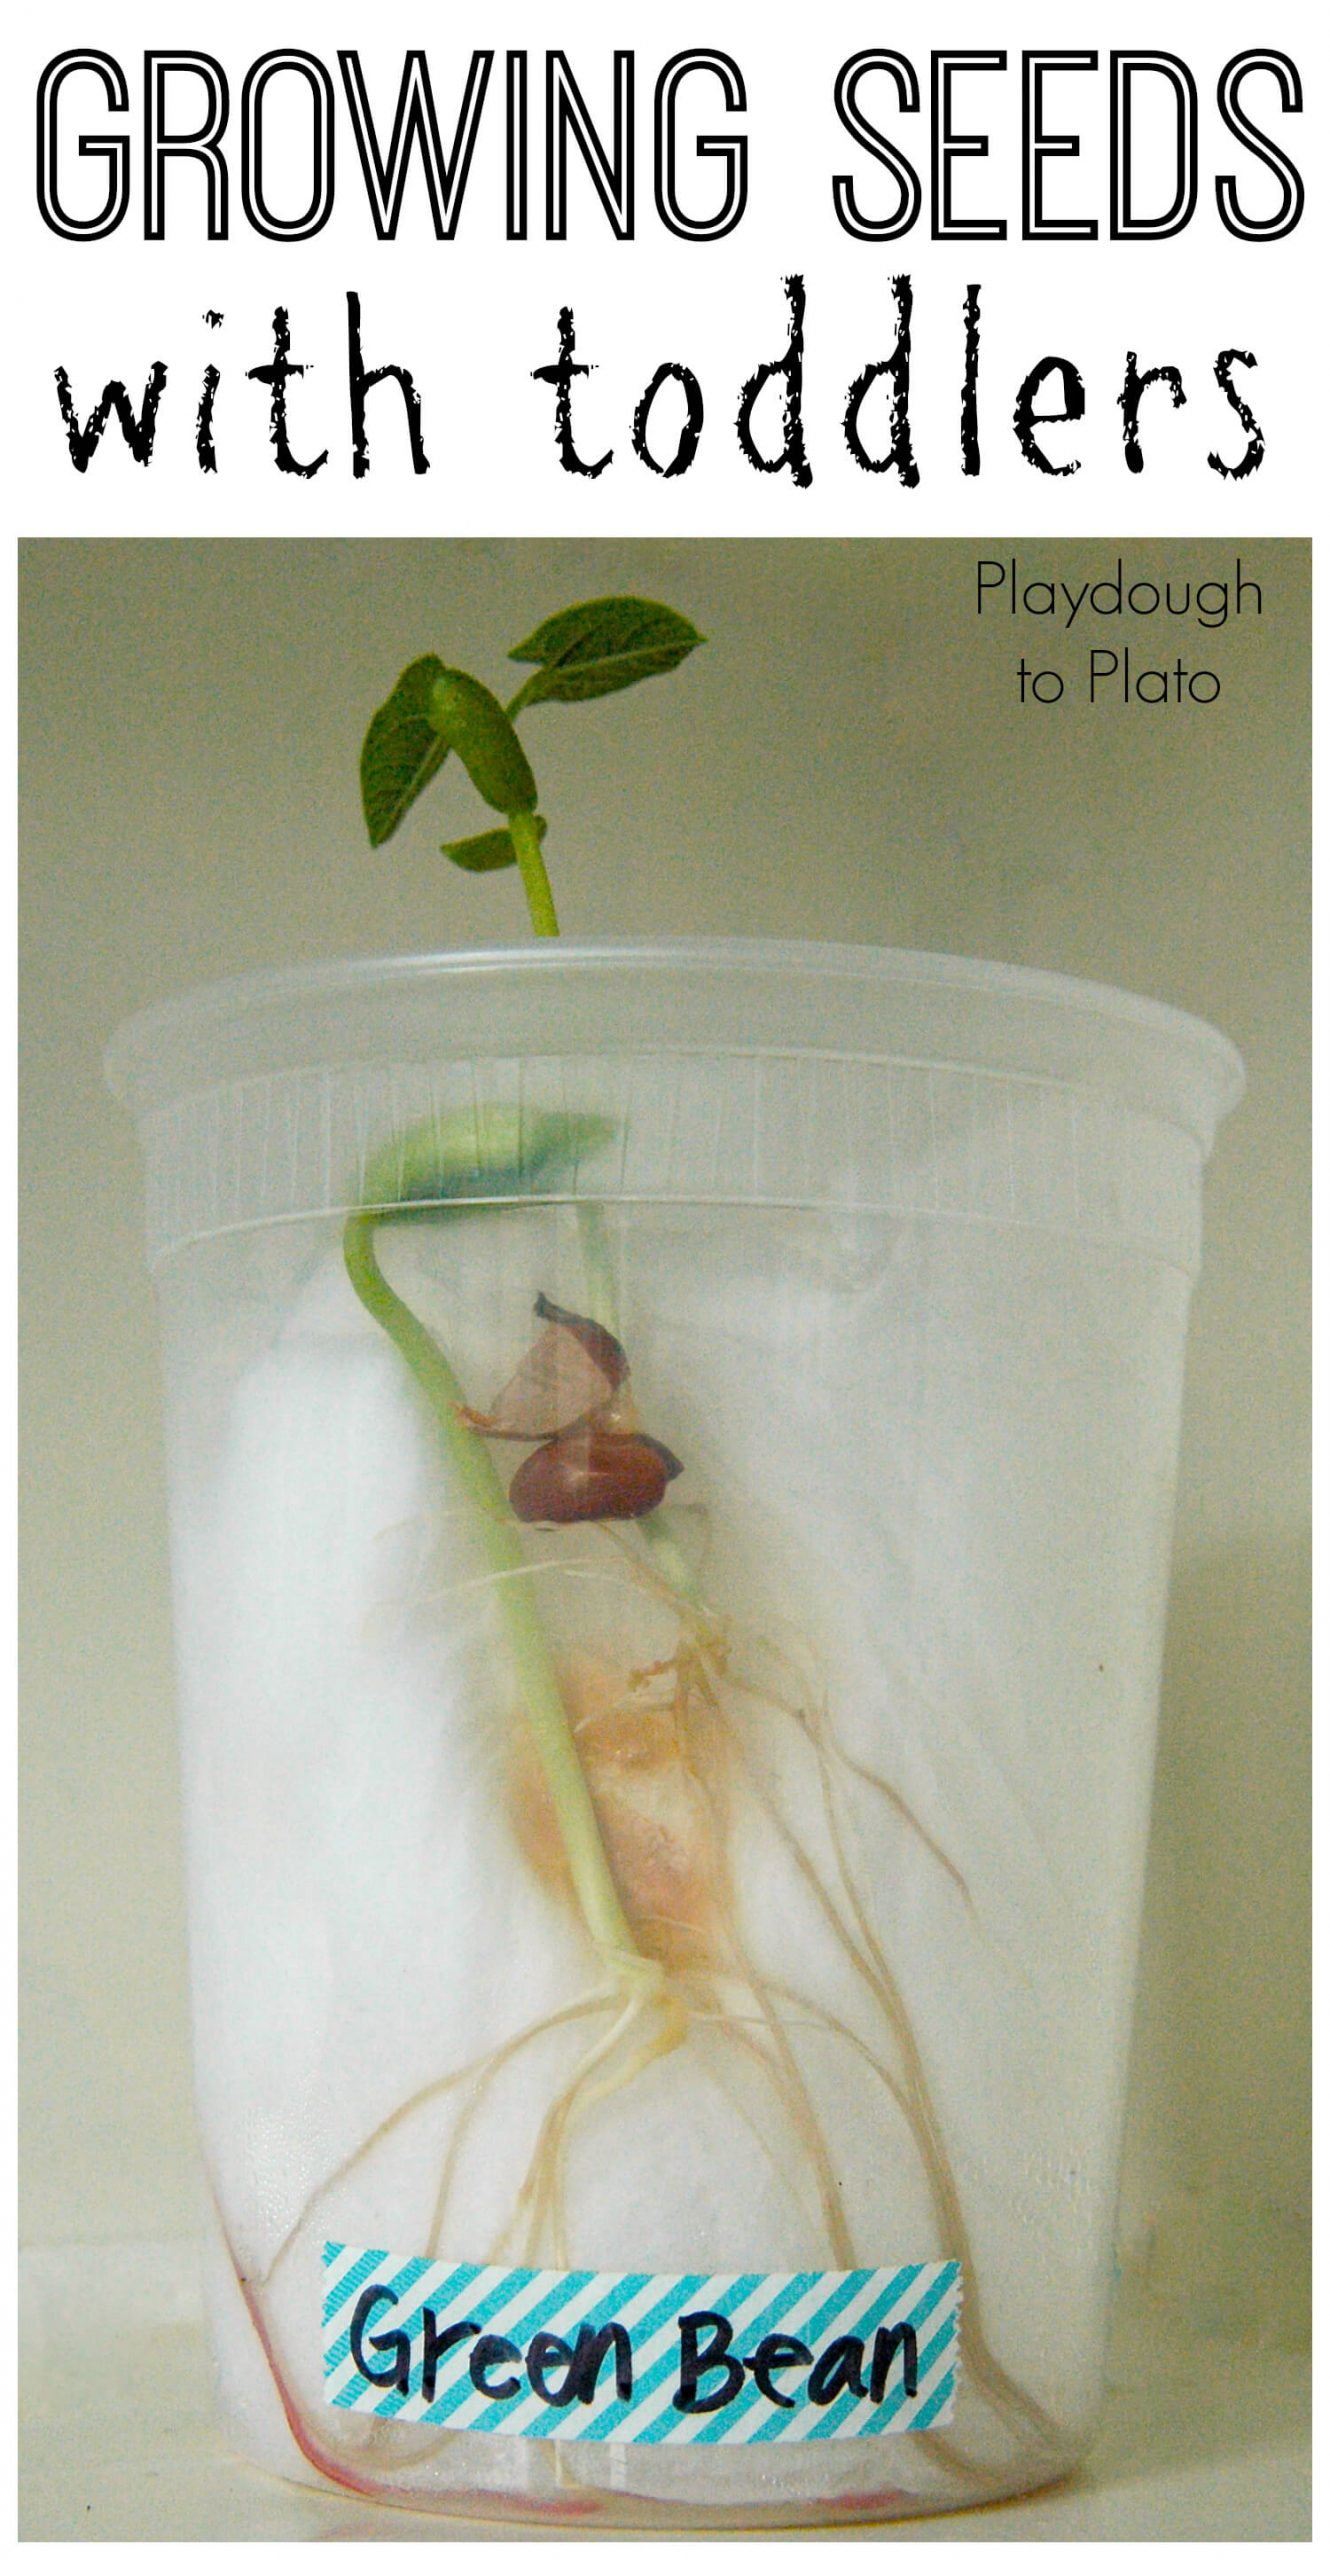 Growing Seeds With Toddlers - Playdough To Plato